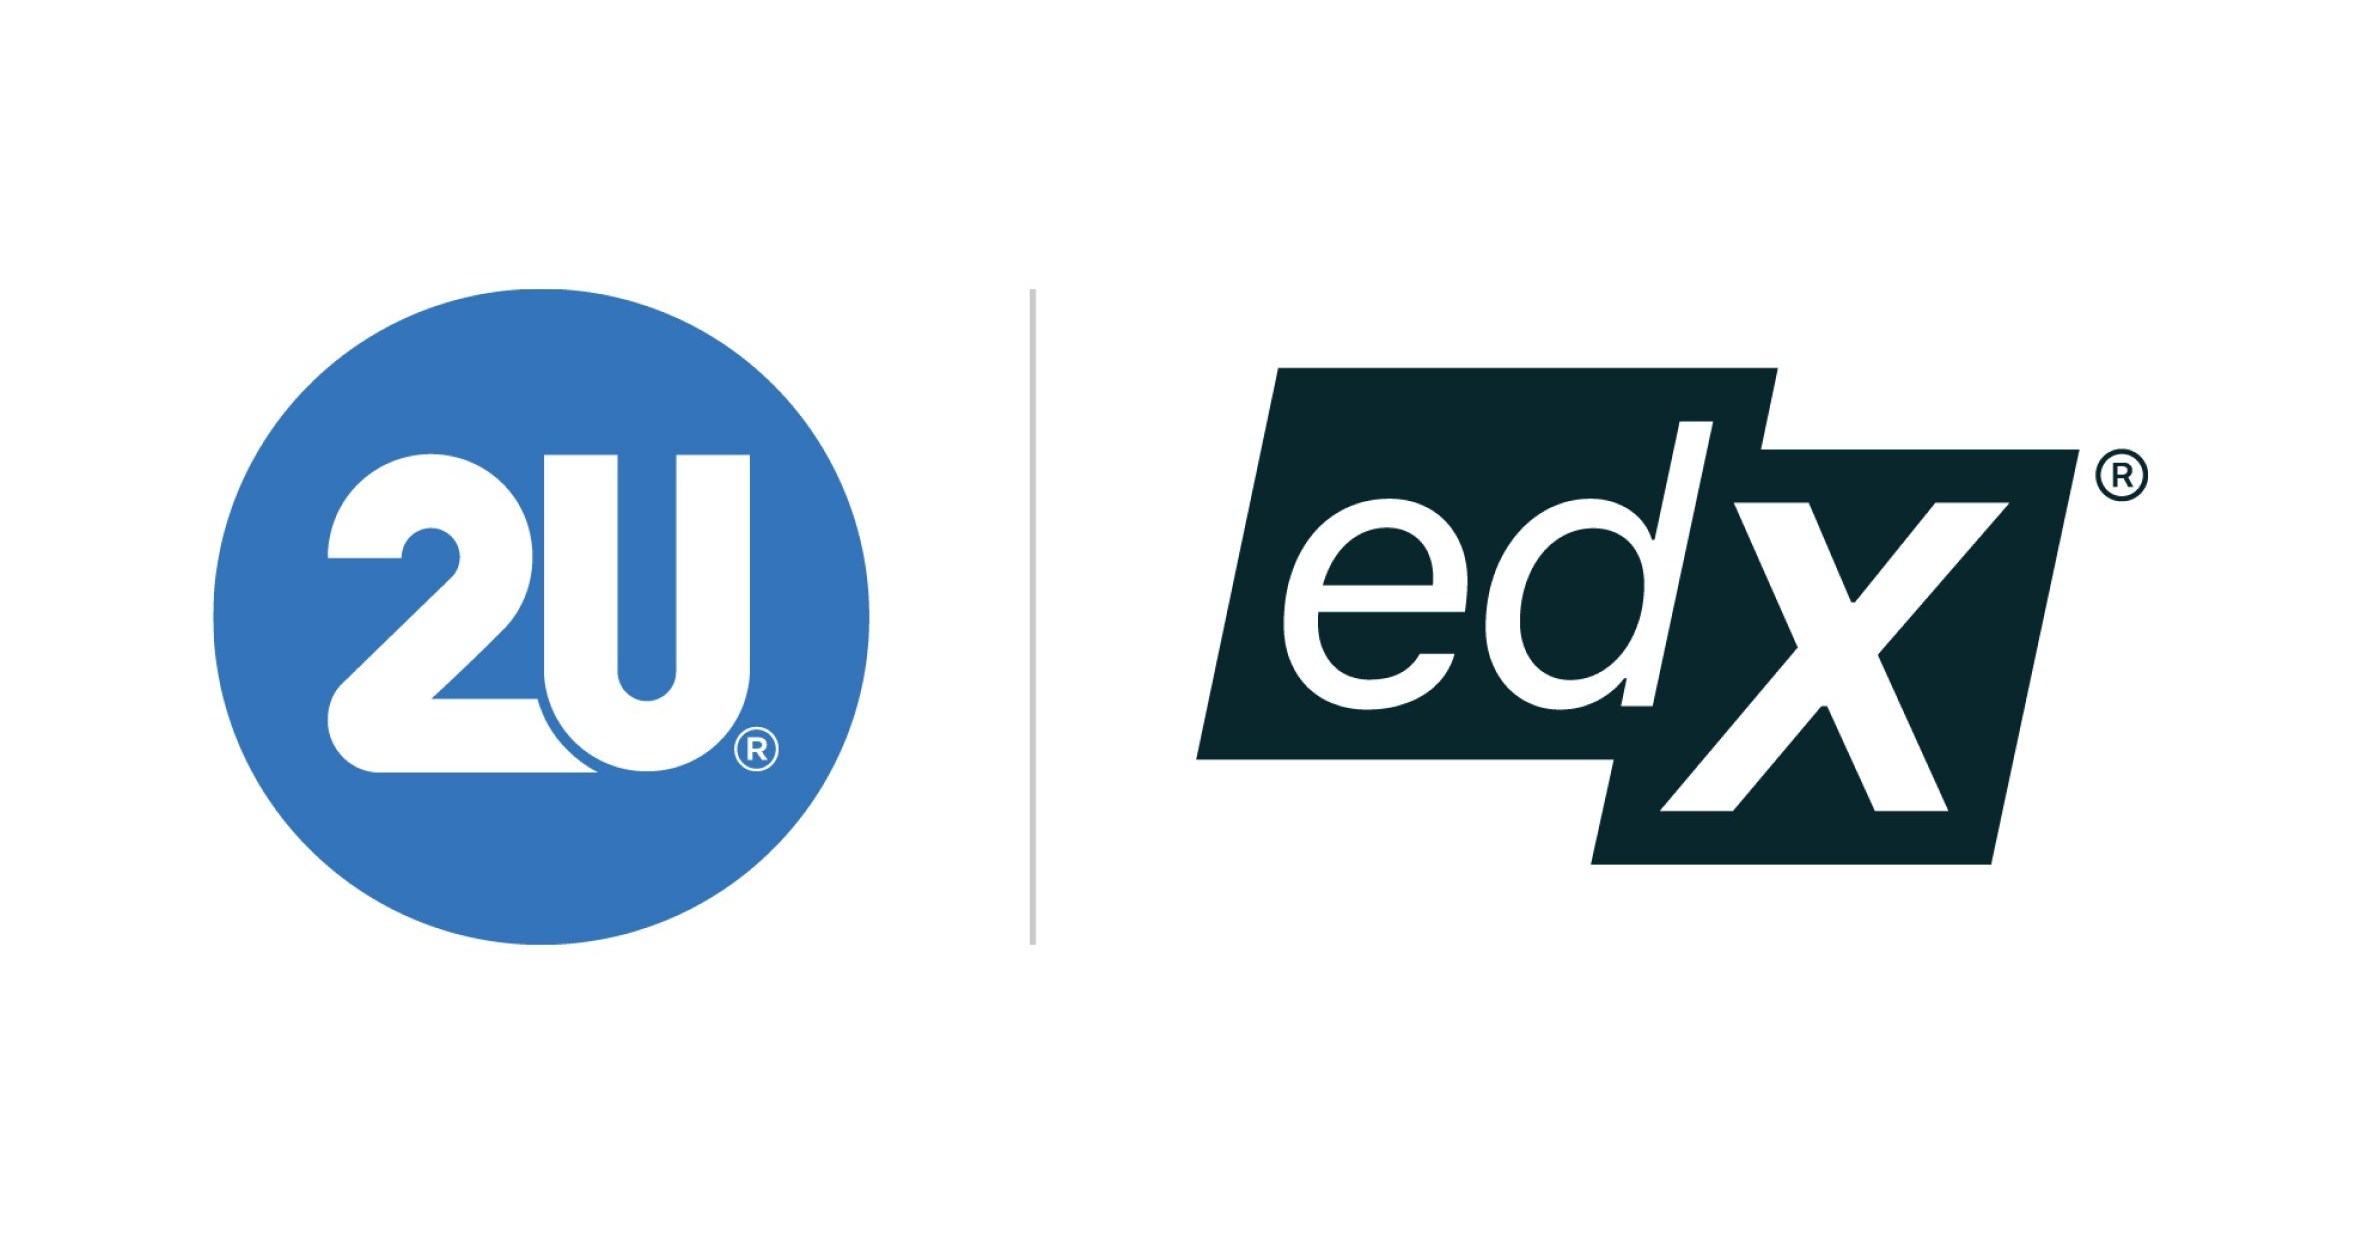 2U, Inc. and edX to Join Together in Industry-Redefining Combination